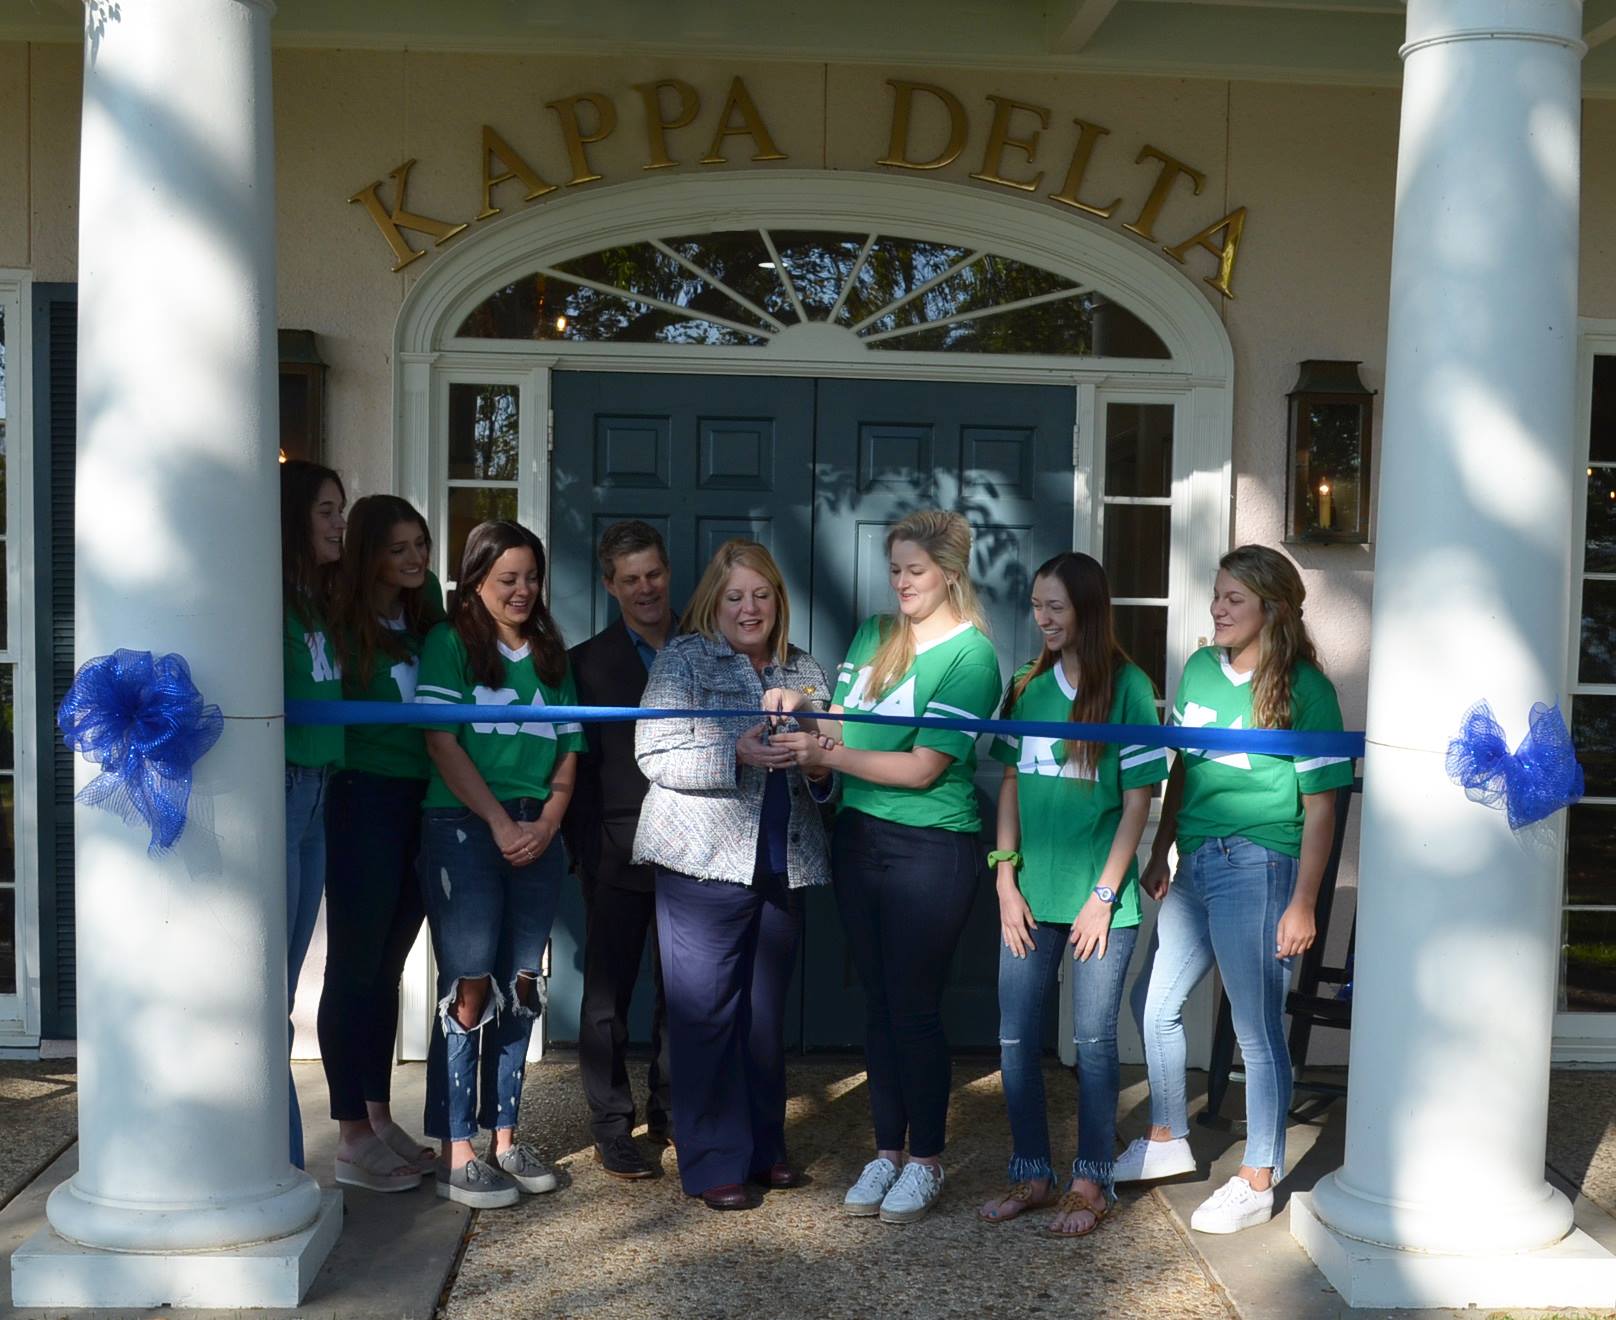 Kappa Delta opens up Child Abuse Prevention Month with Ribbon Cutting